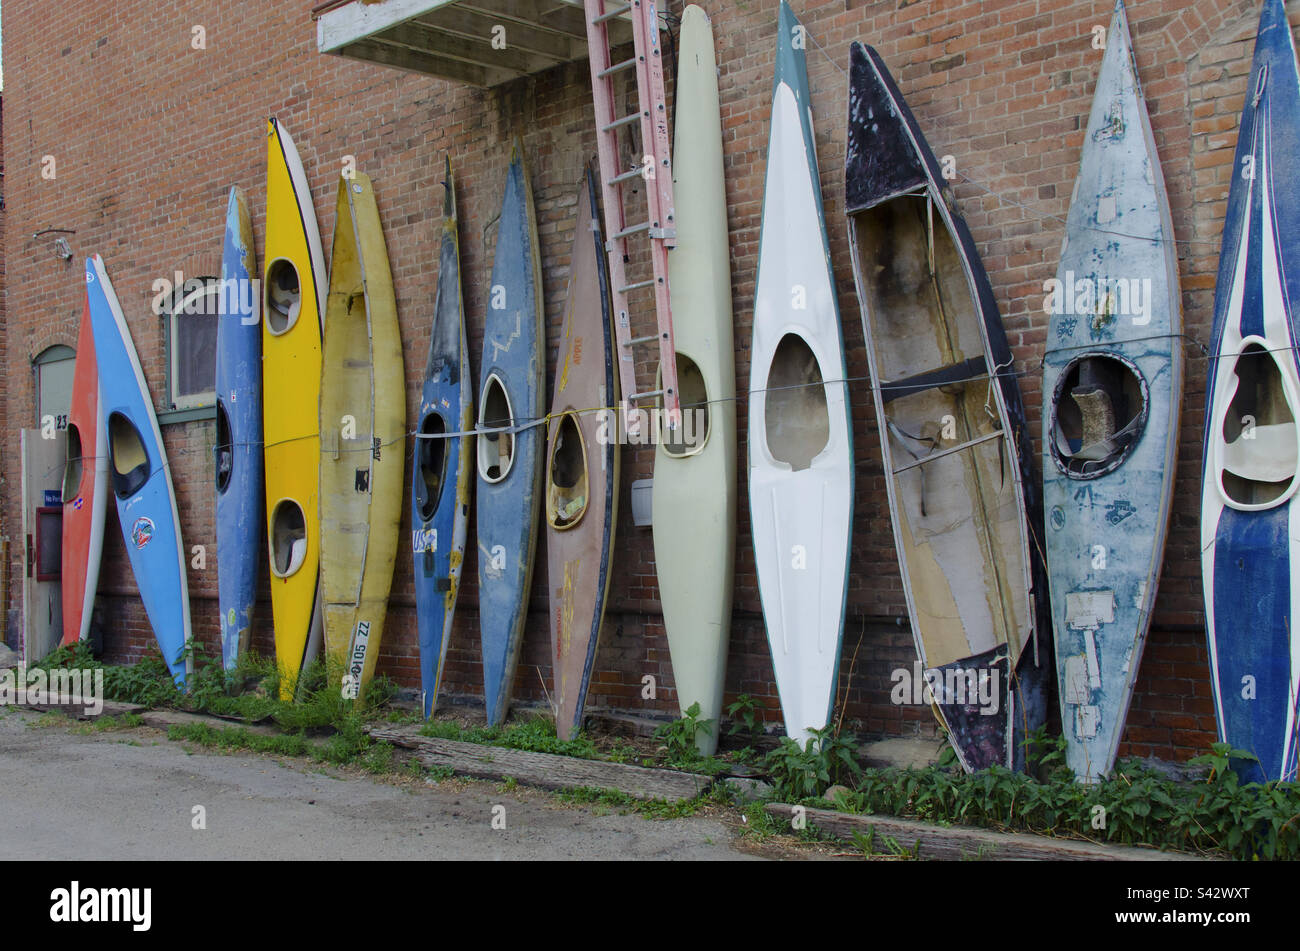 A bunch of old kayaks or end up against the brick wall Stock Photo